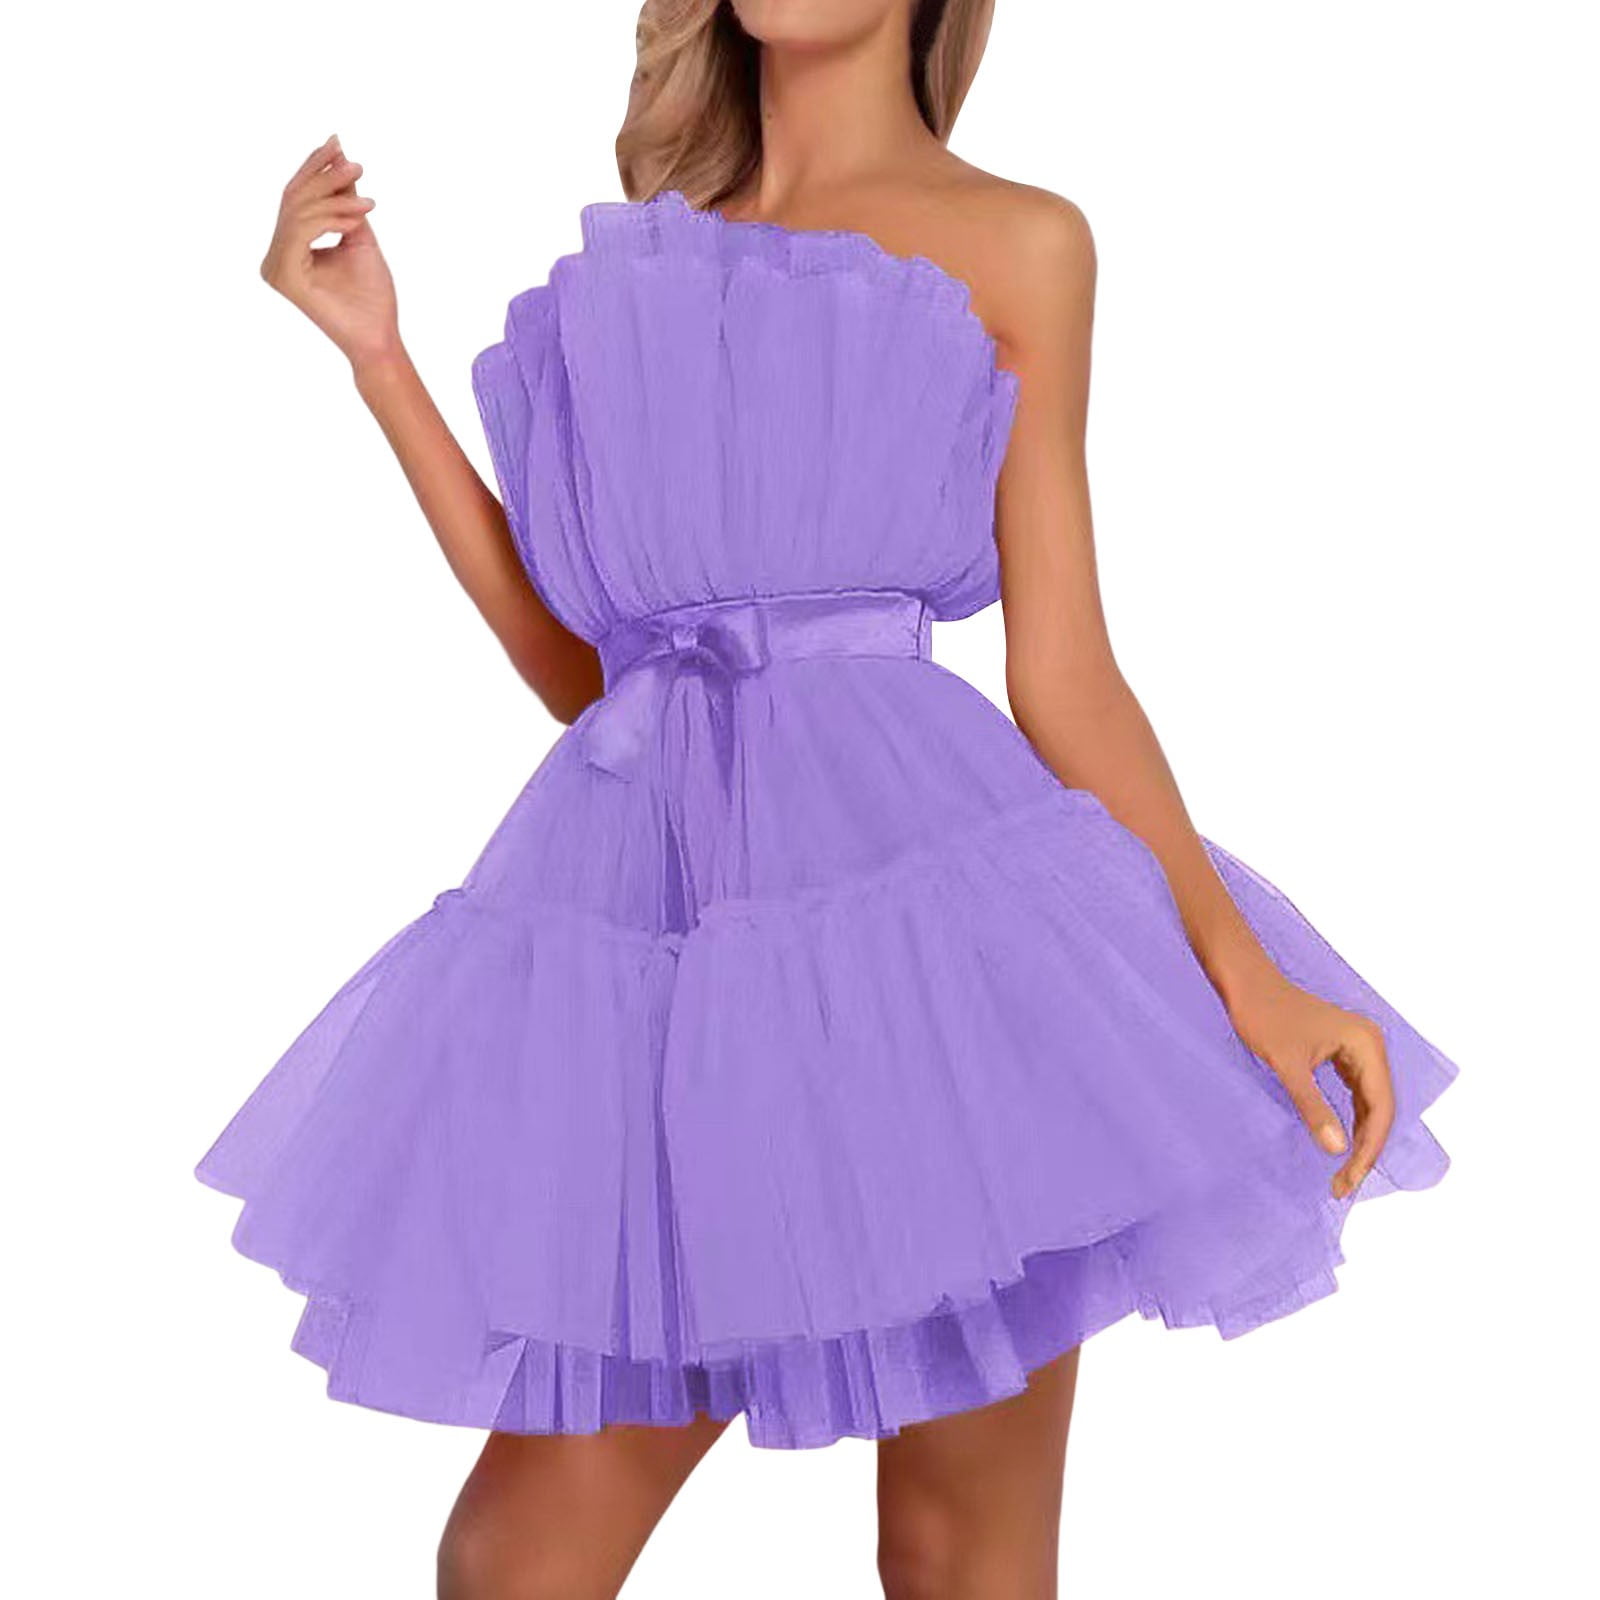  Women's Tulle Dress Pleated Puffy Prom Dresses